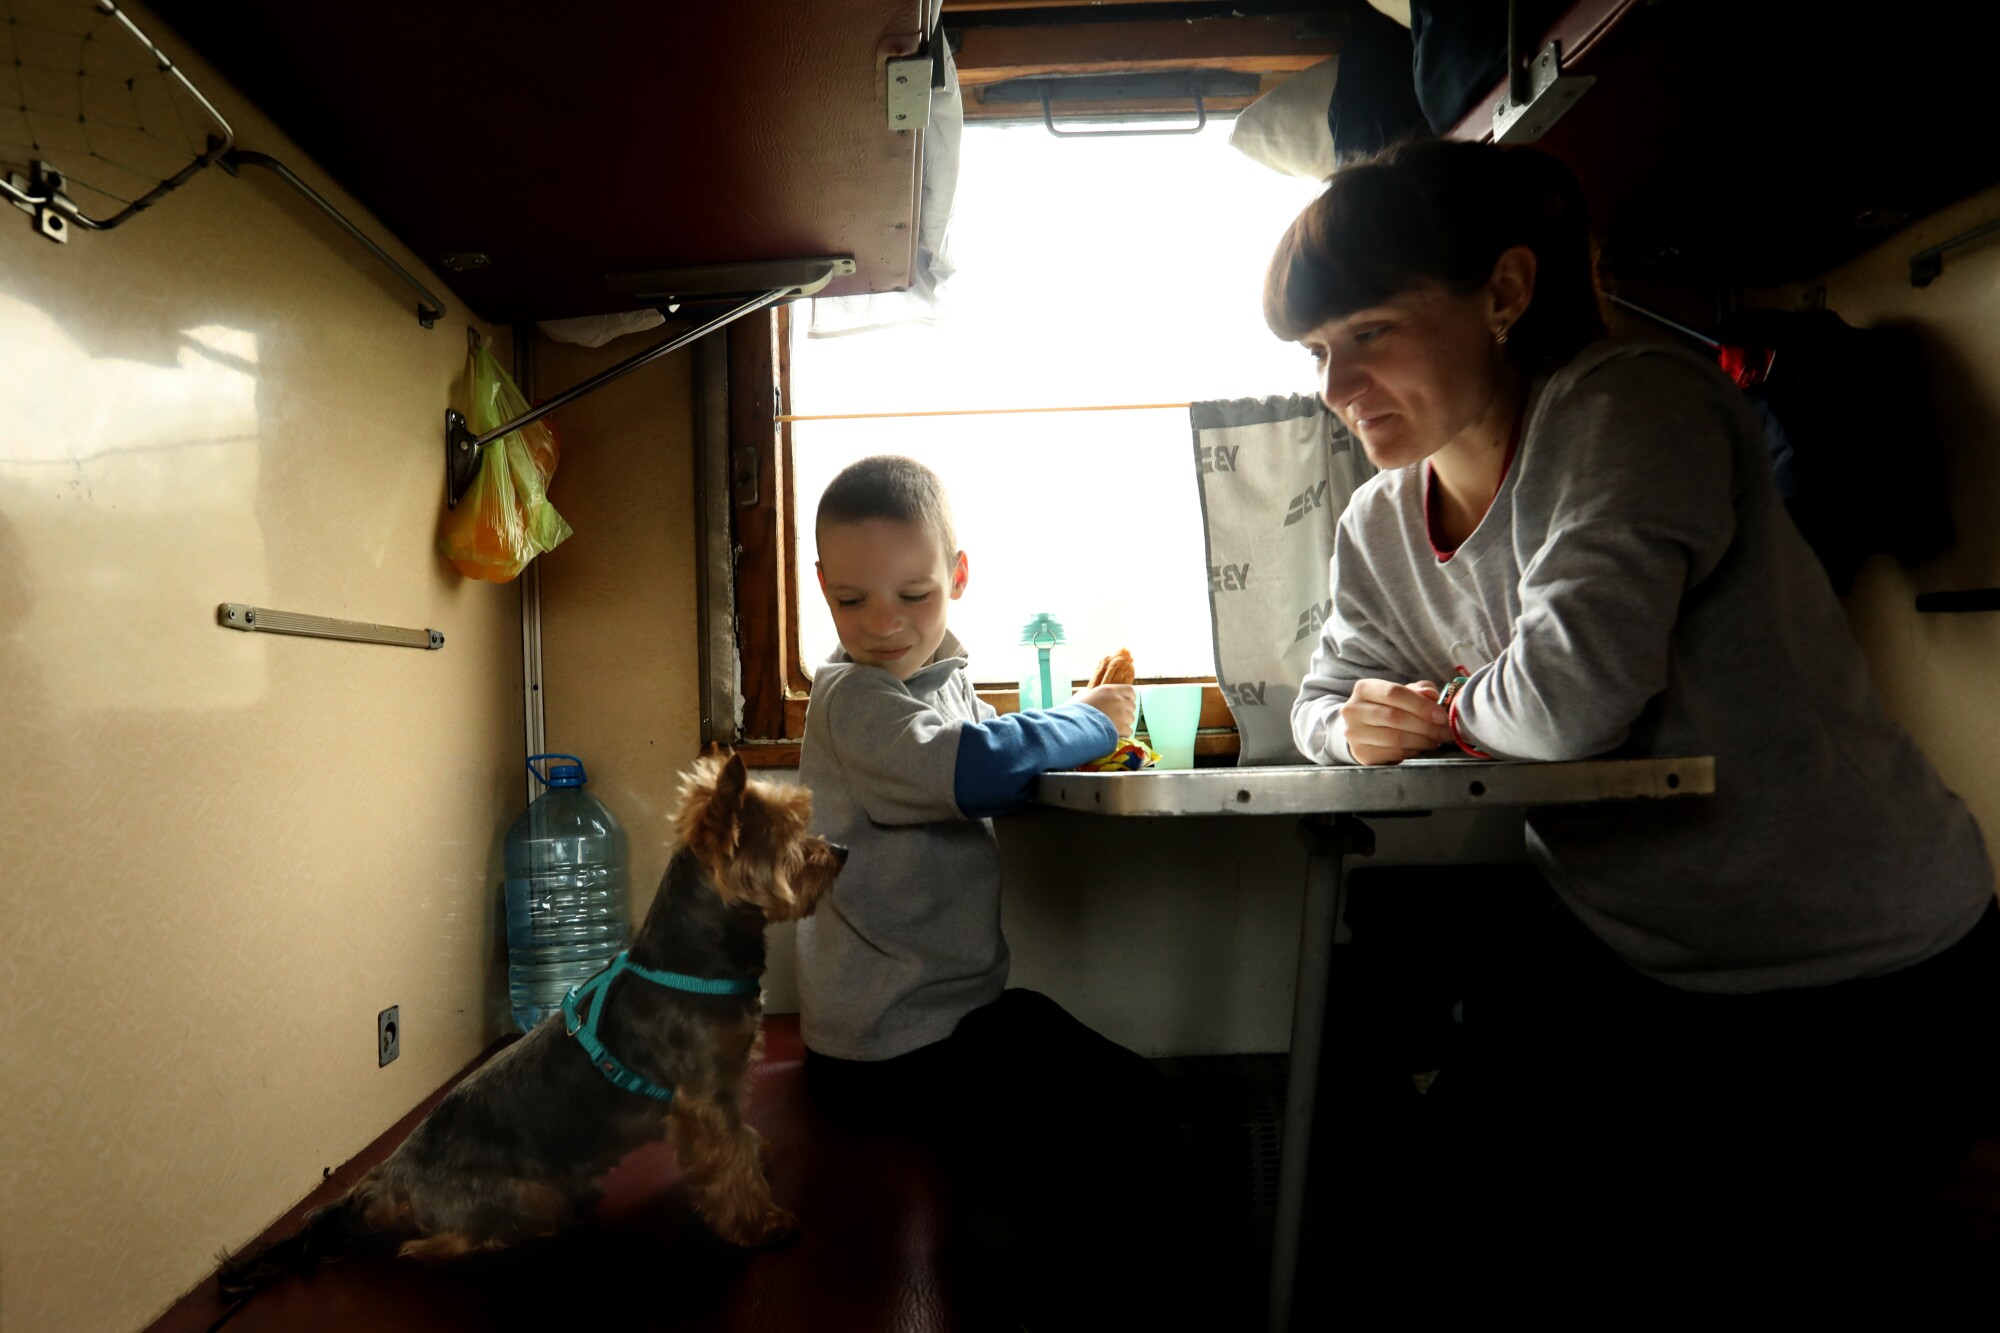 A woman and a boy, center, seated near a train window look down at a dog on the left 